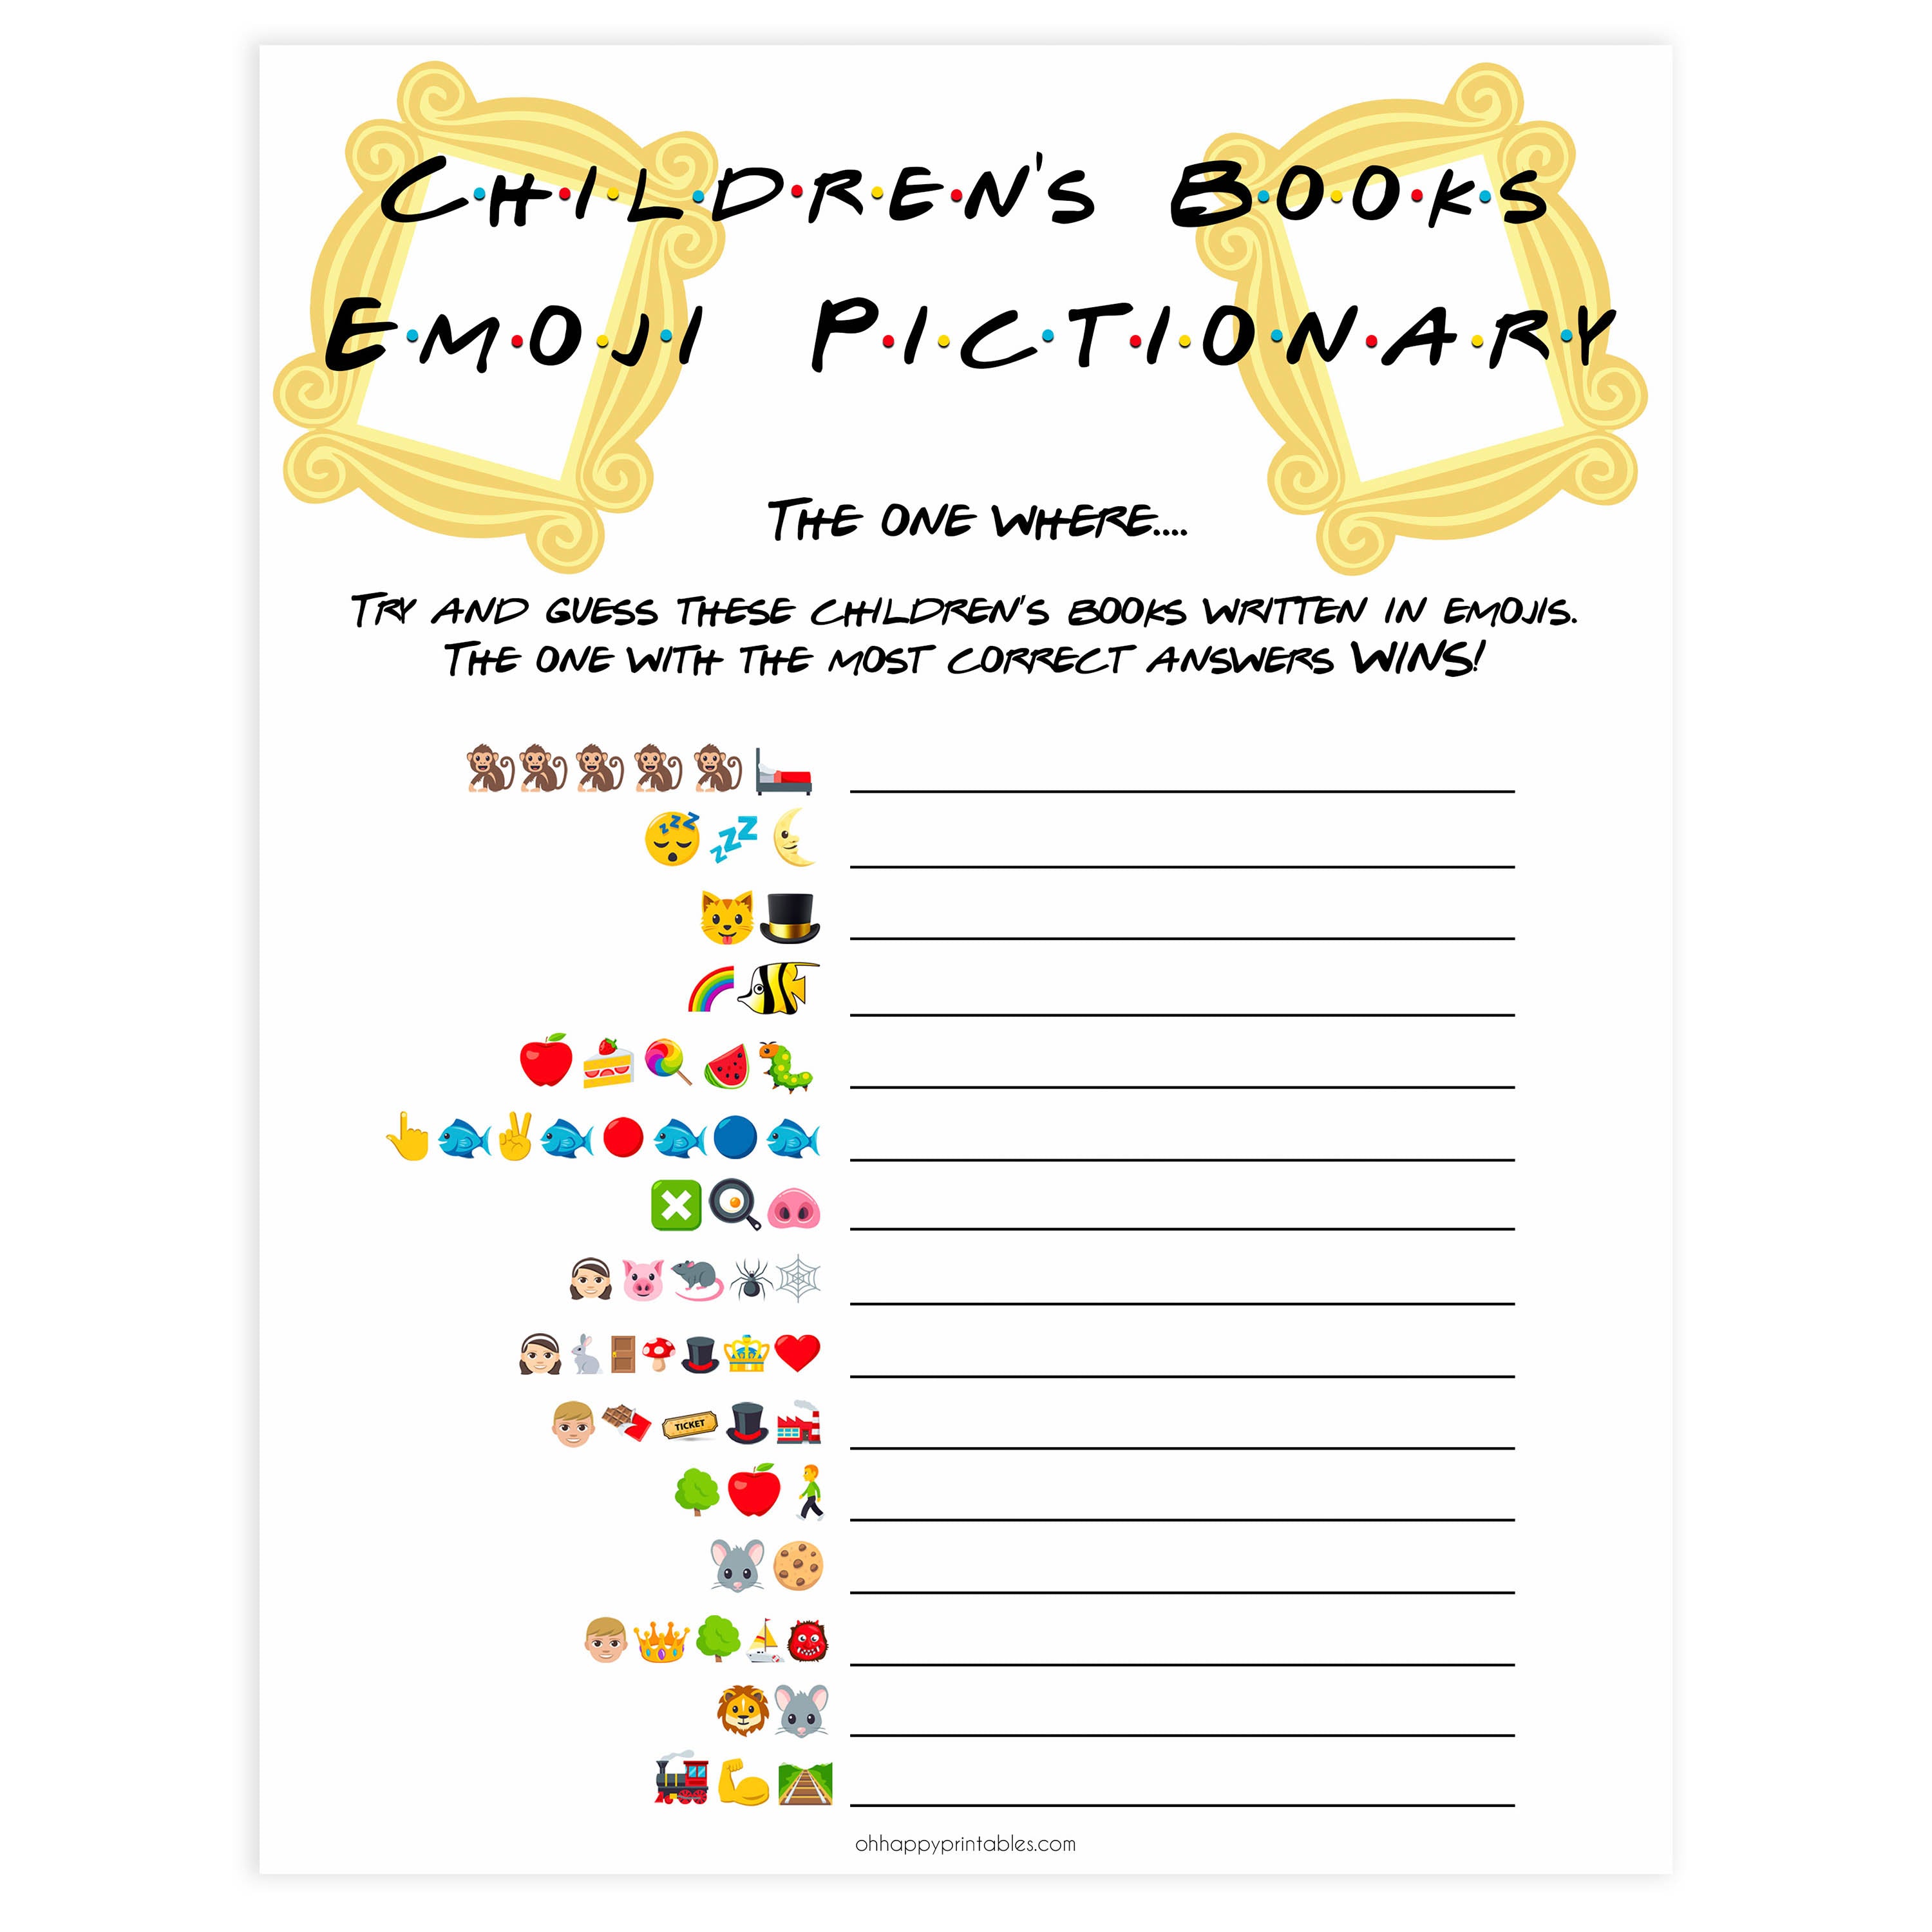 childrens books emoji pictionary, printable baby shower games, friends baby shower theme, the one where baby shower